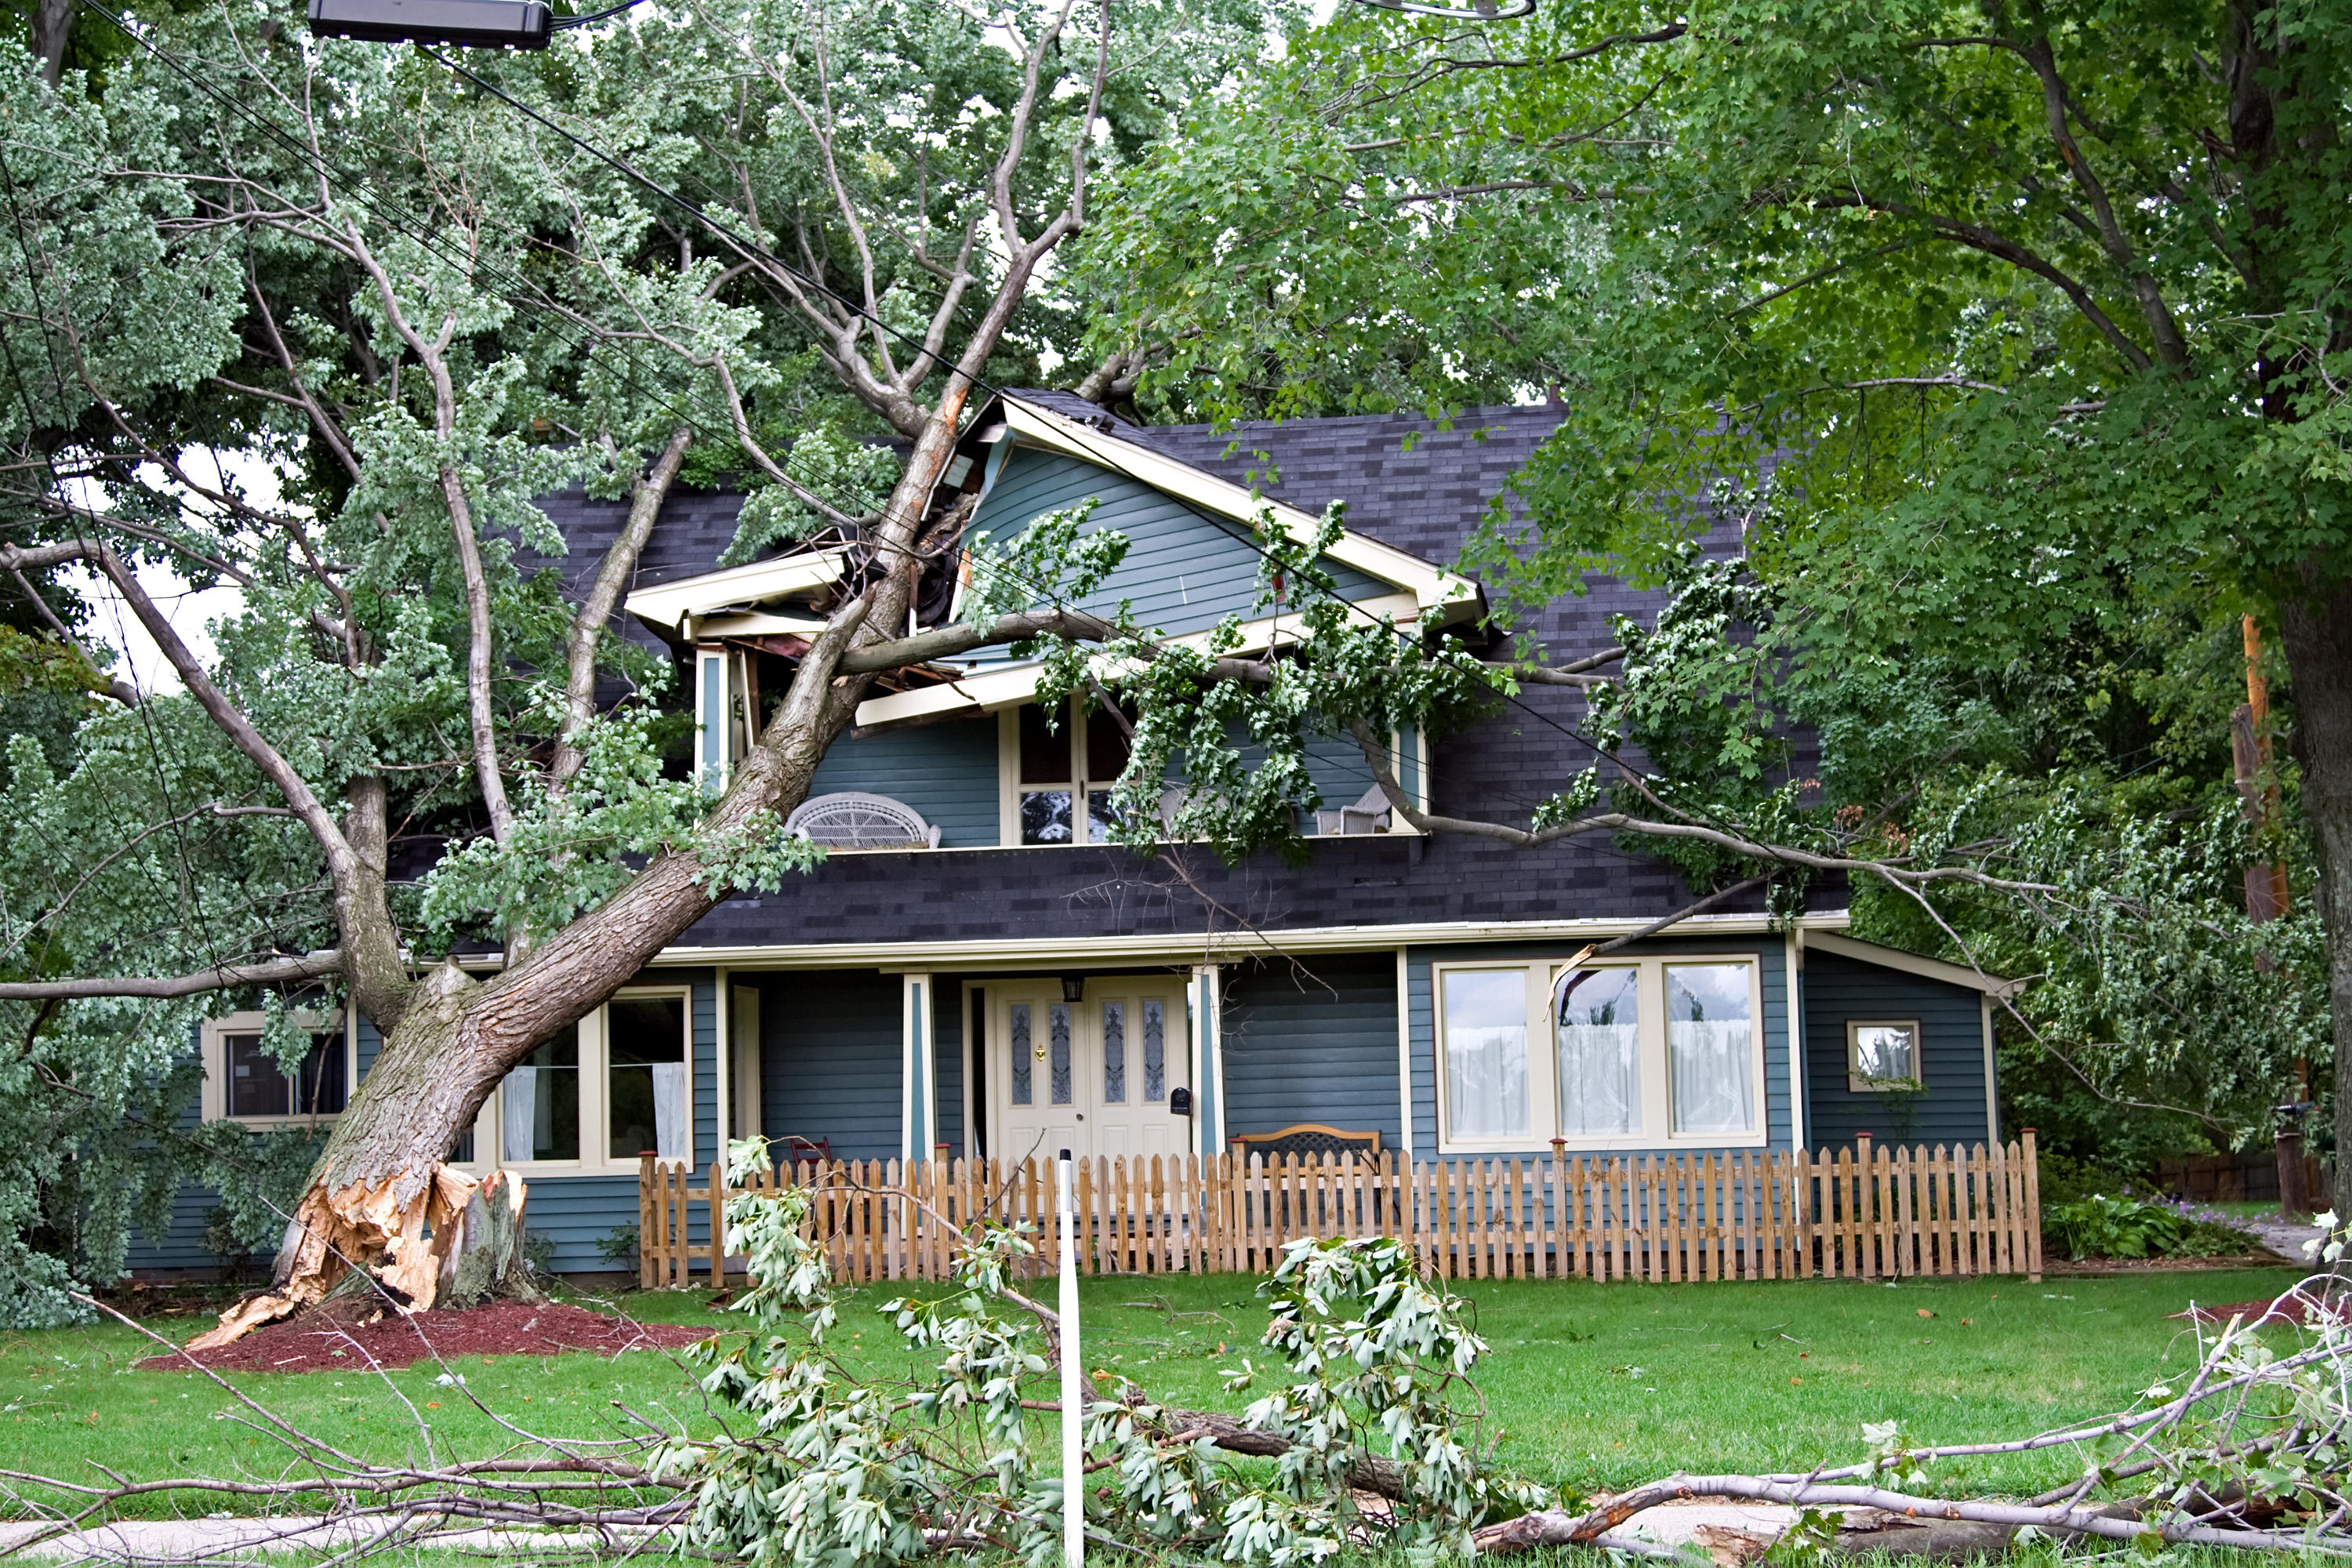 Storm damage can be dramatic or subtle.